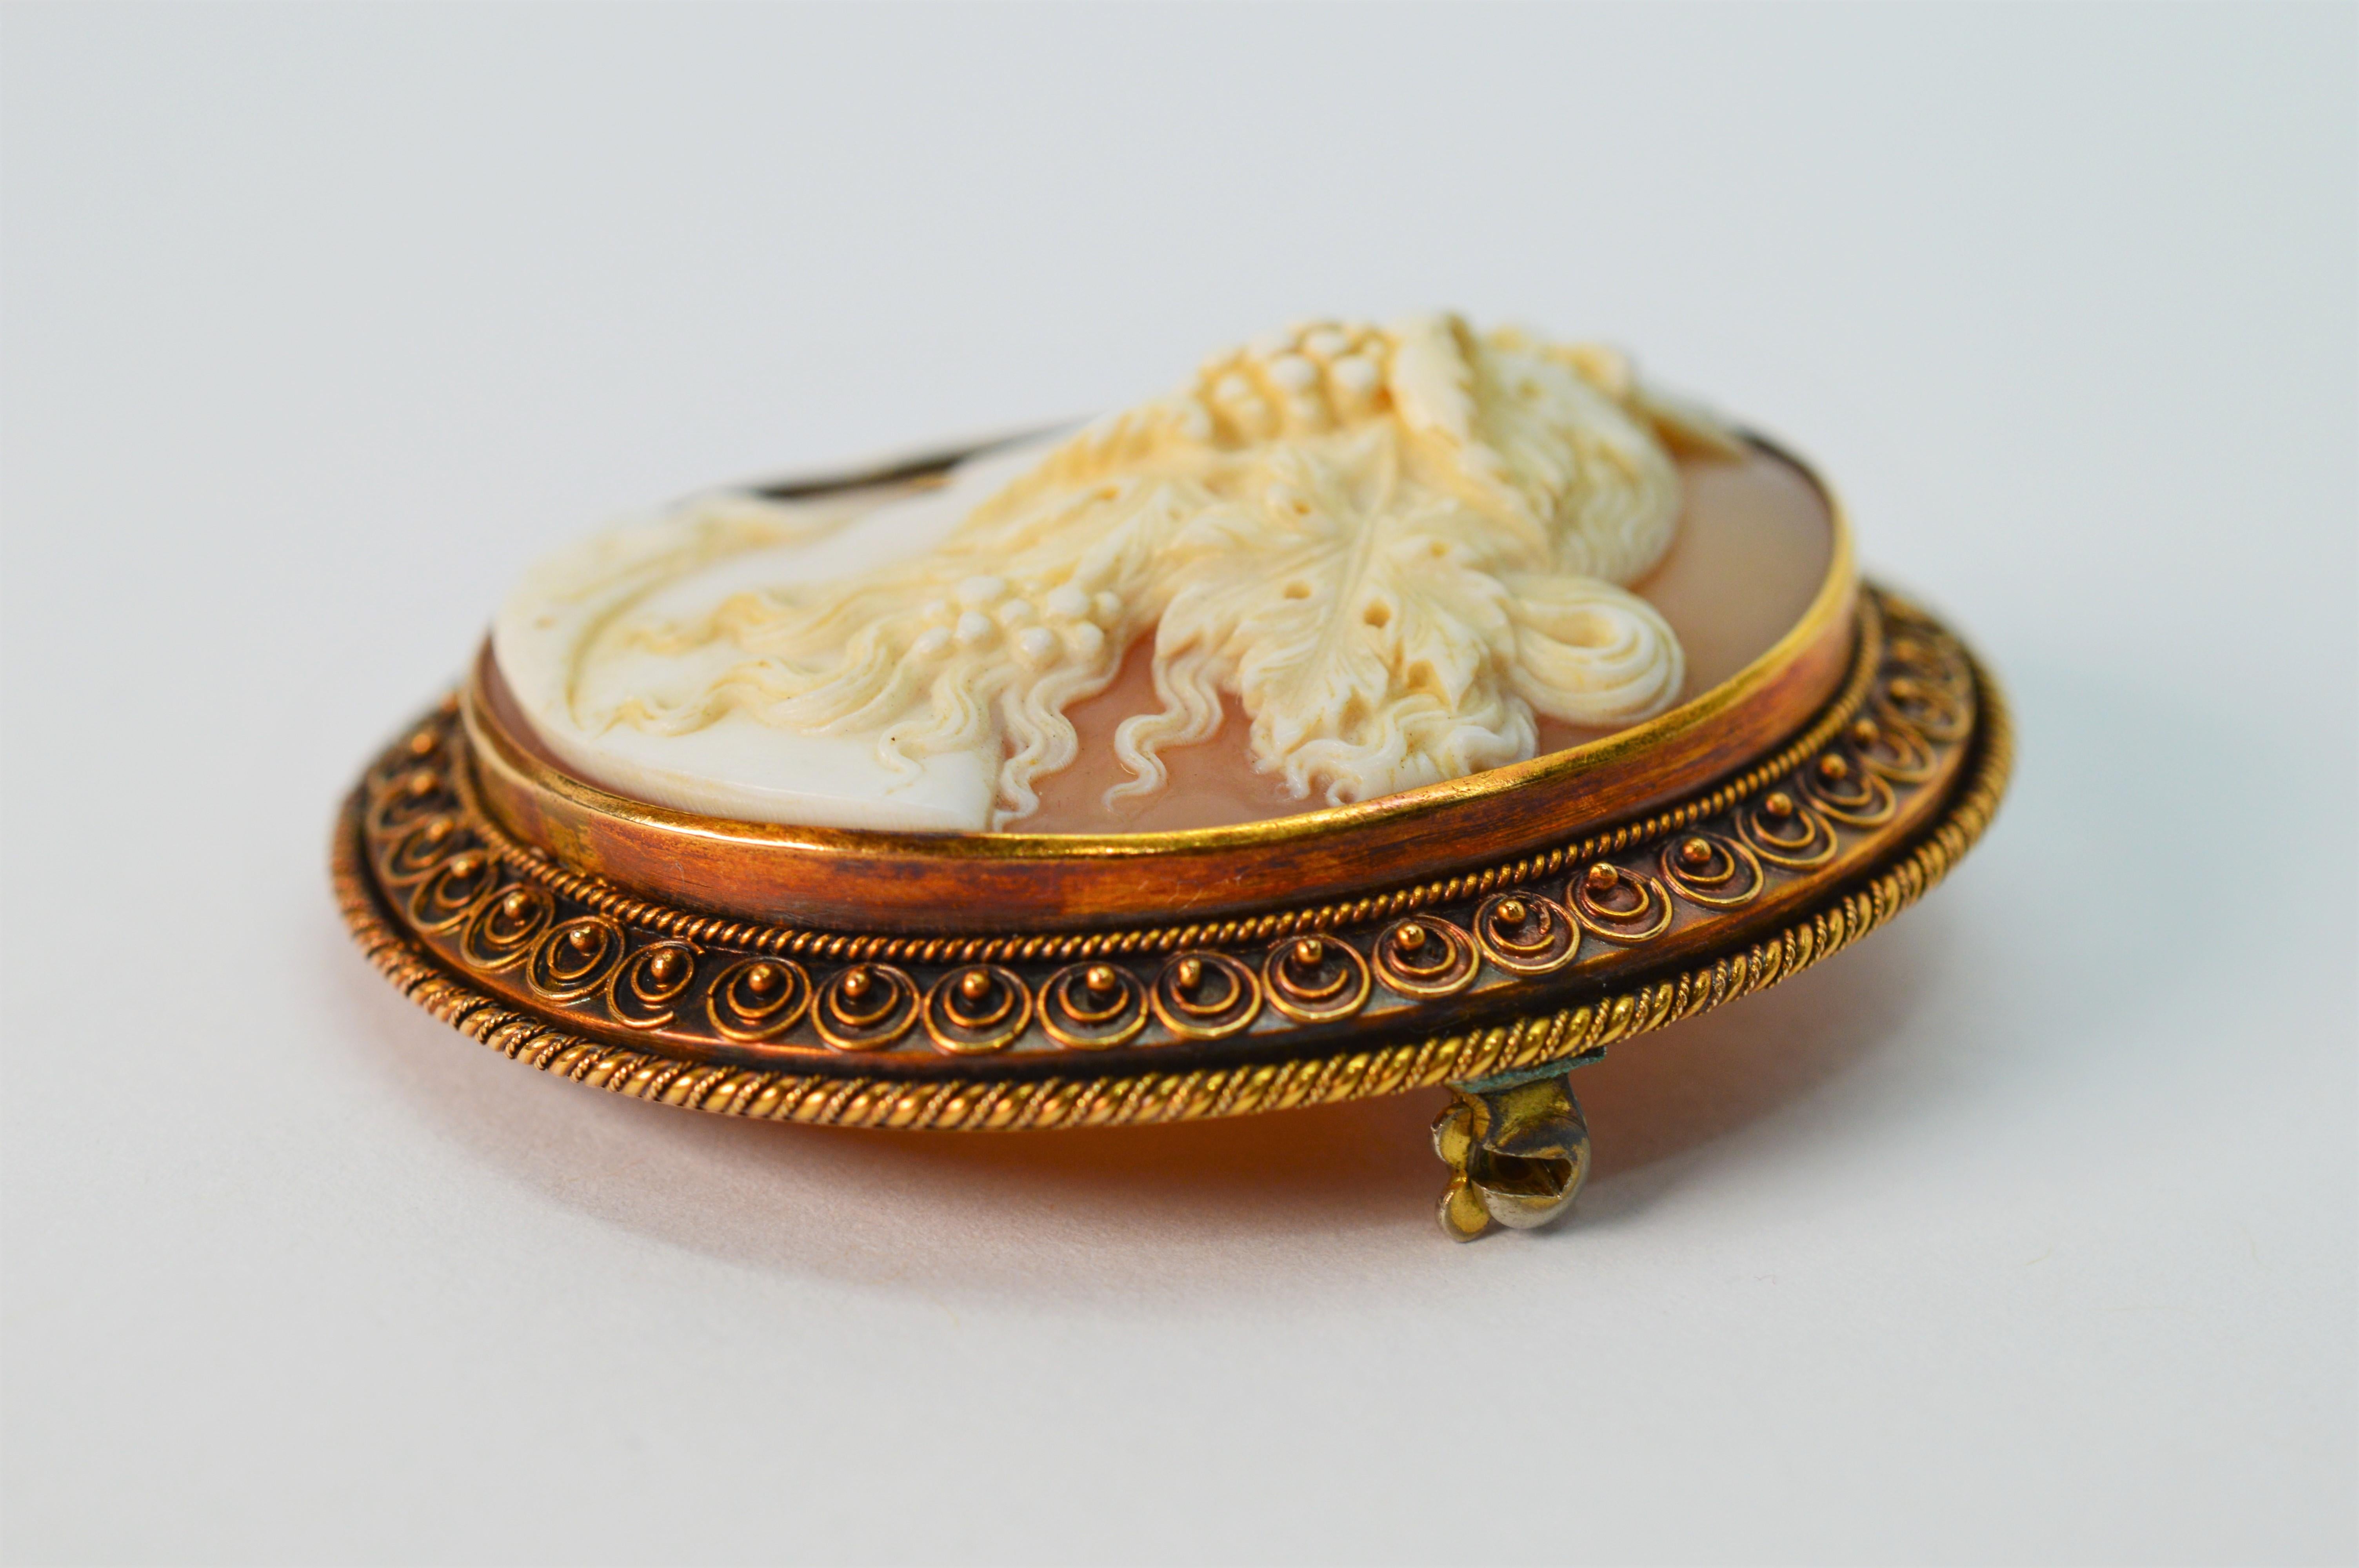 19th Century Italian High Relief Cameo Gold Brooch In Excellent Condition For Sale In Mount Kisco, NY